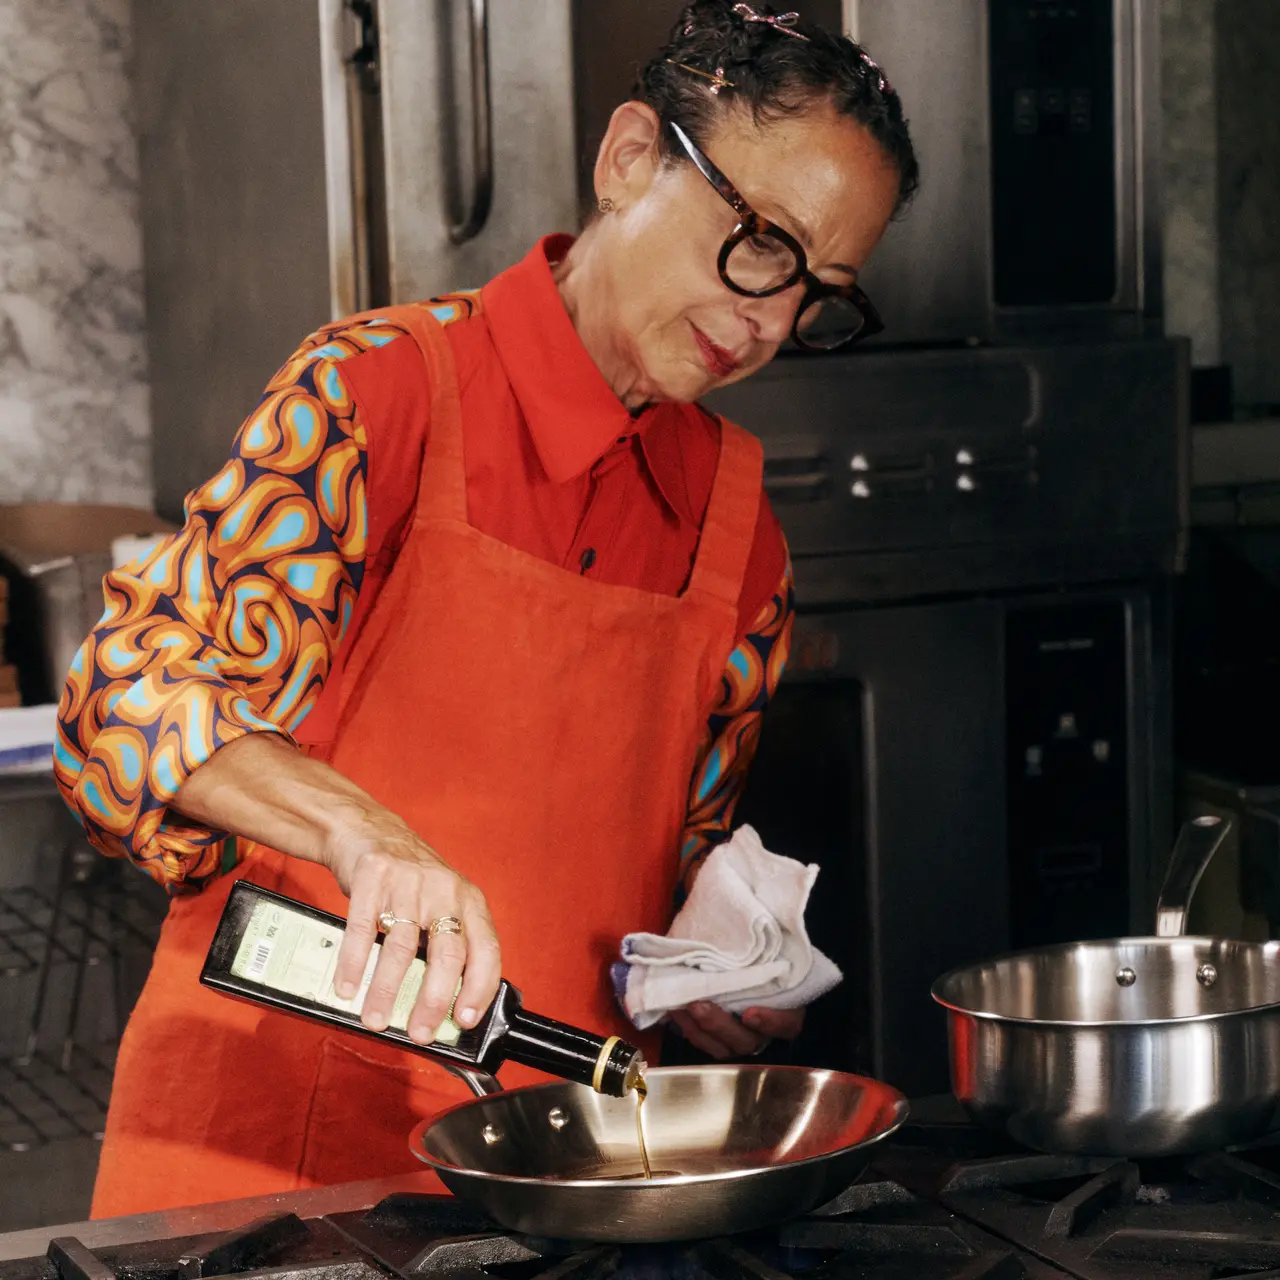 A person wearing glasses and a colorful shirt with a red apron pours liquid into a frying pan while monitoring the temperature with a digital thermometer.